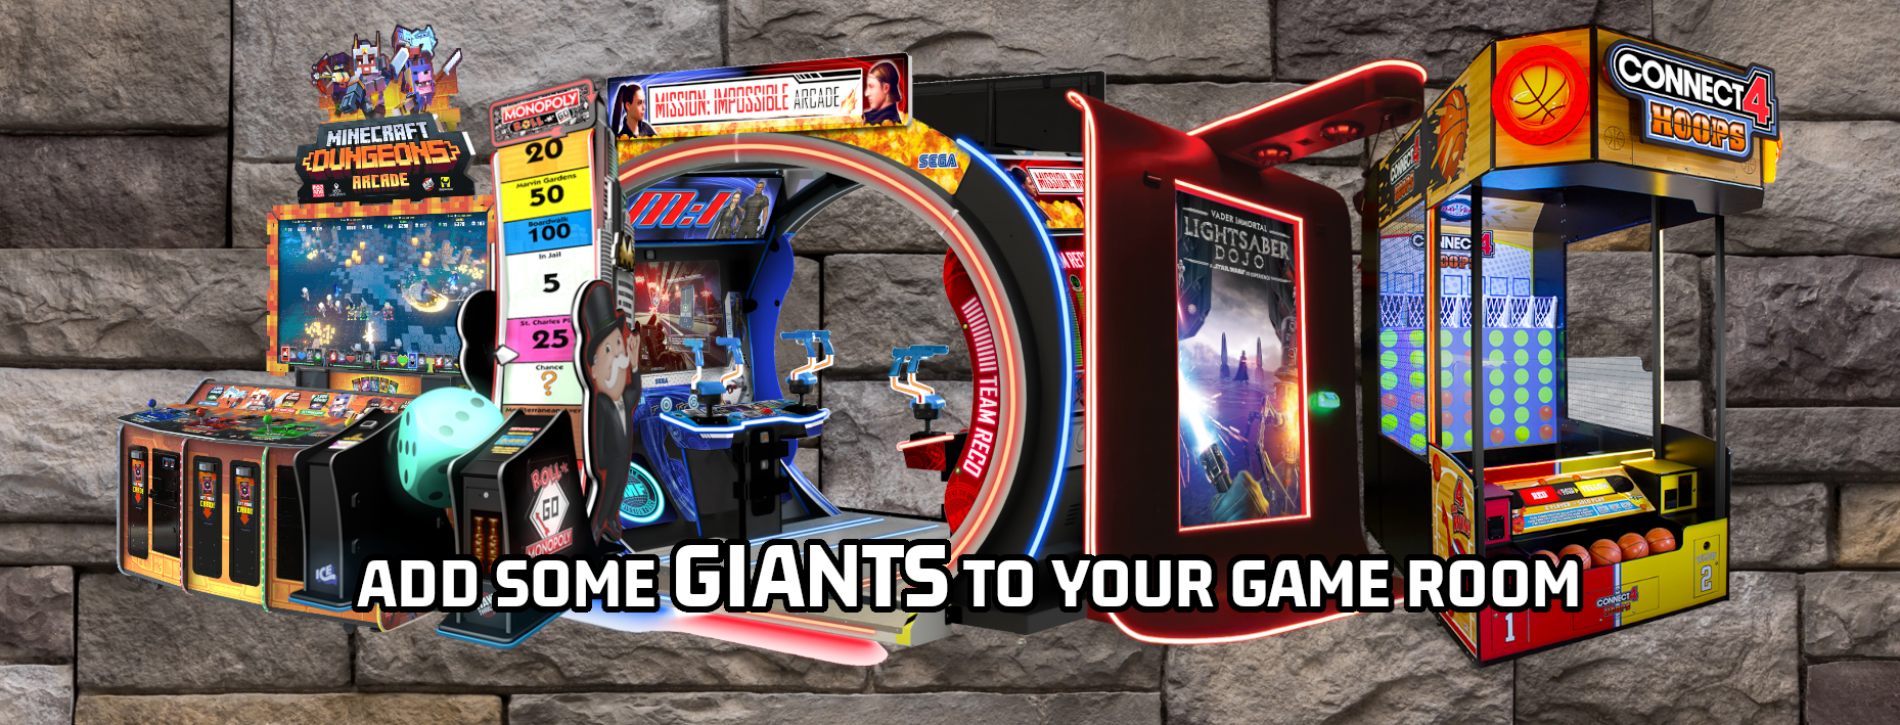 giant_games3